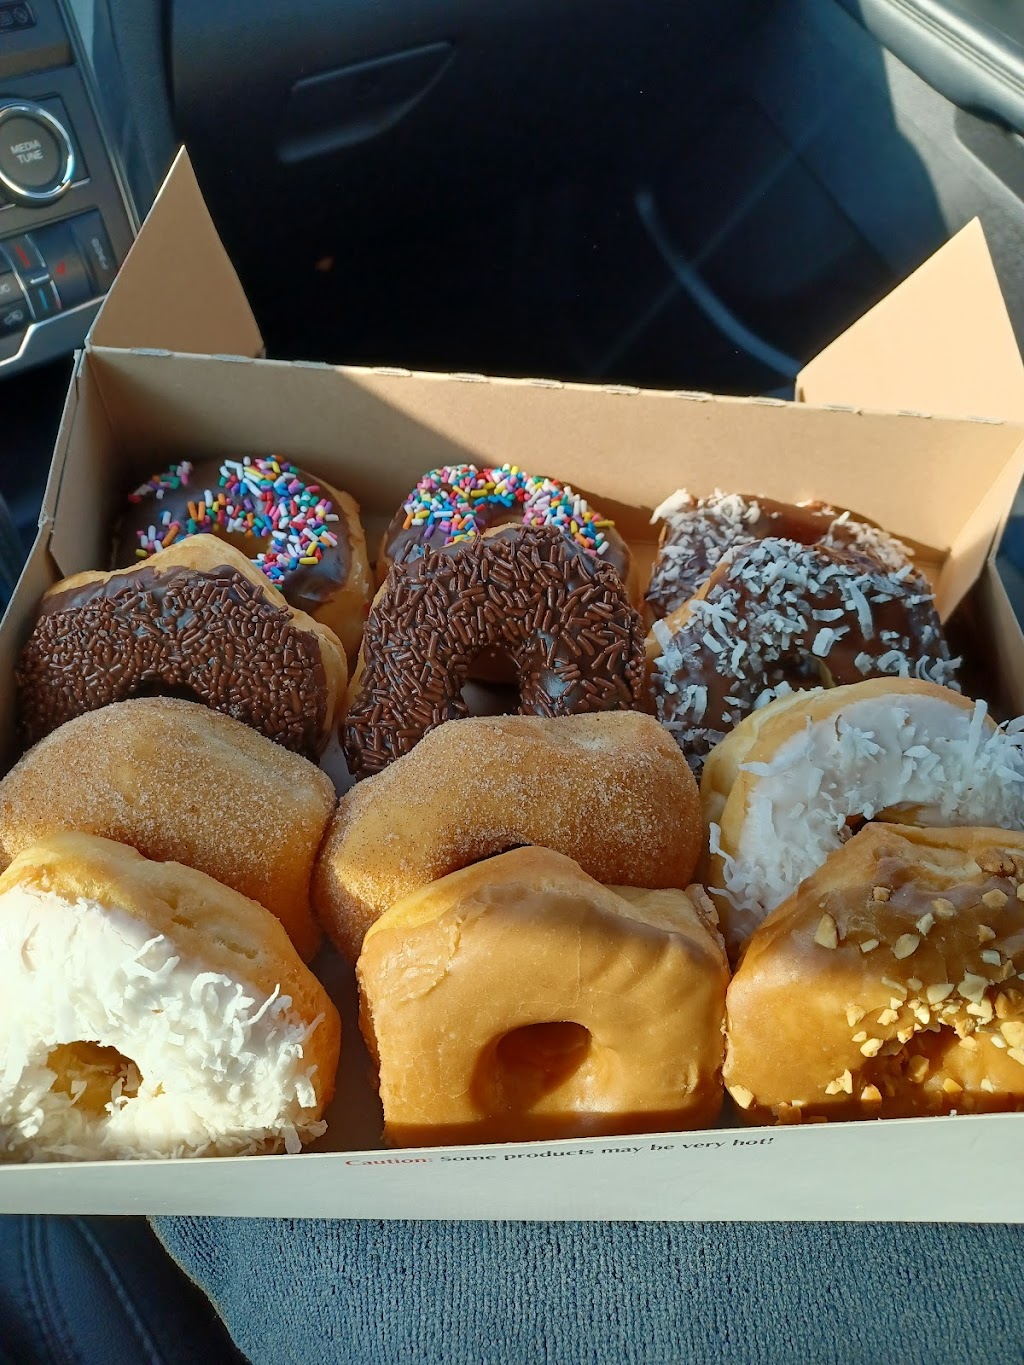 Shipley Do-Nuts | 3300 SE Loop 820, Forest Hill, TX 76140 | Phone: (817) 562-4752